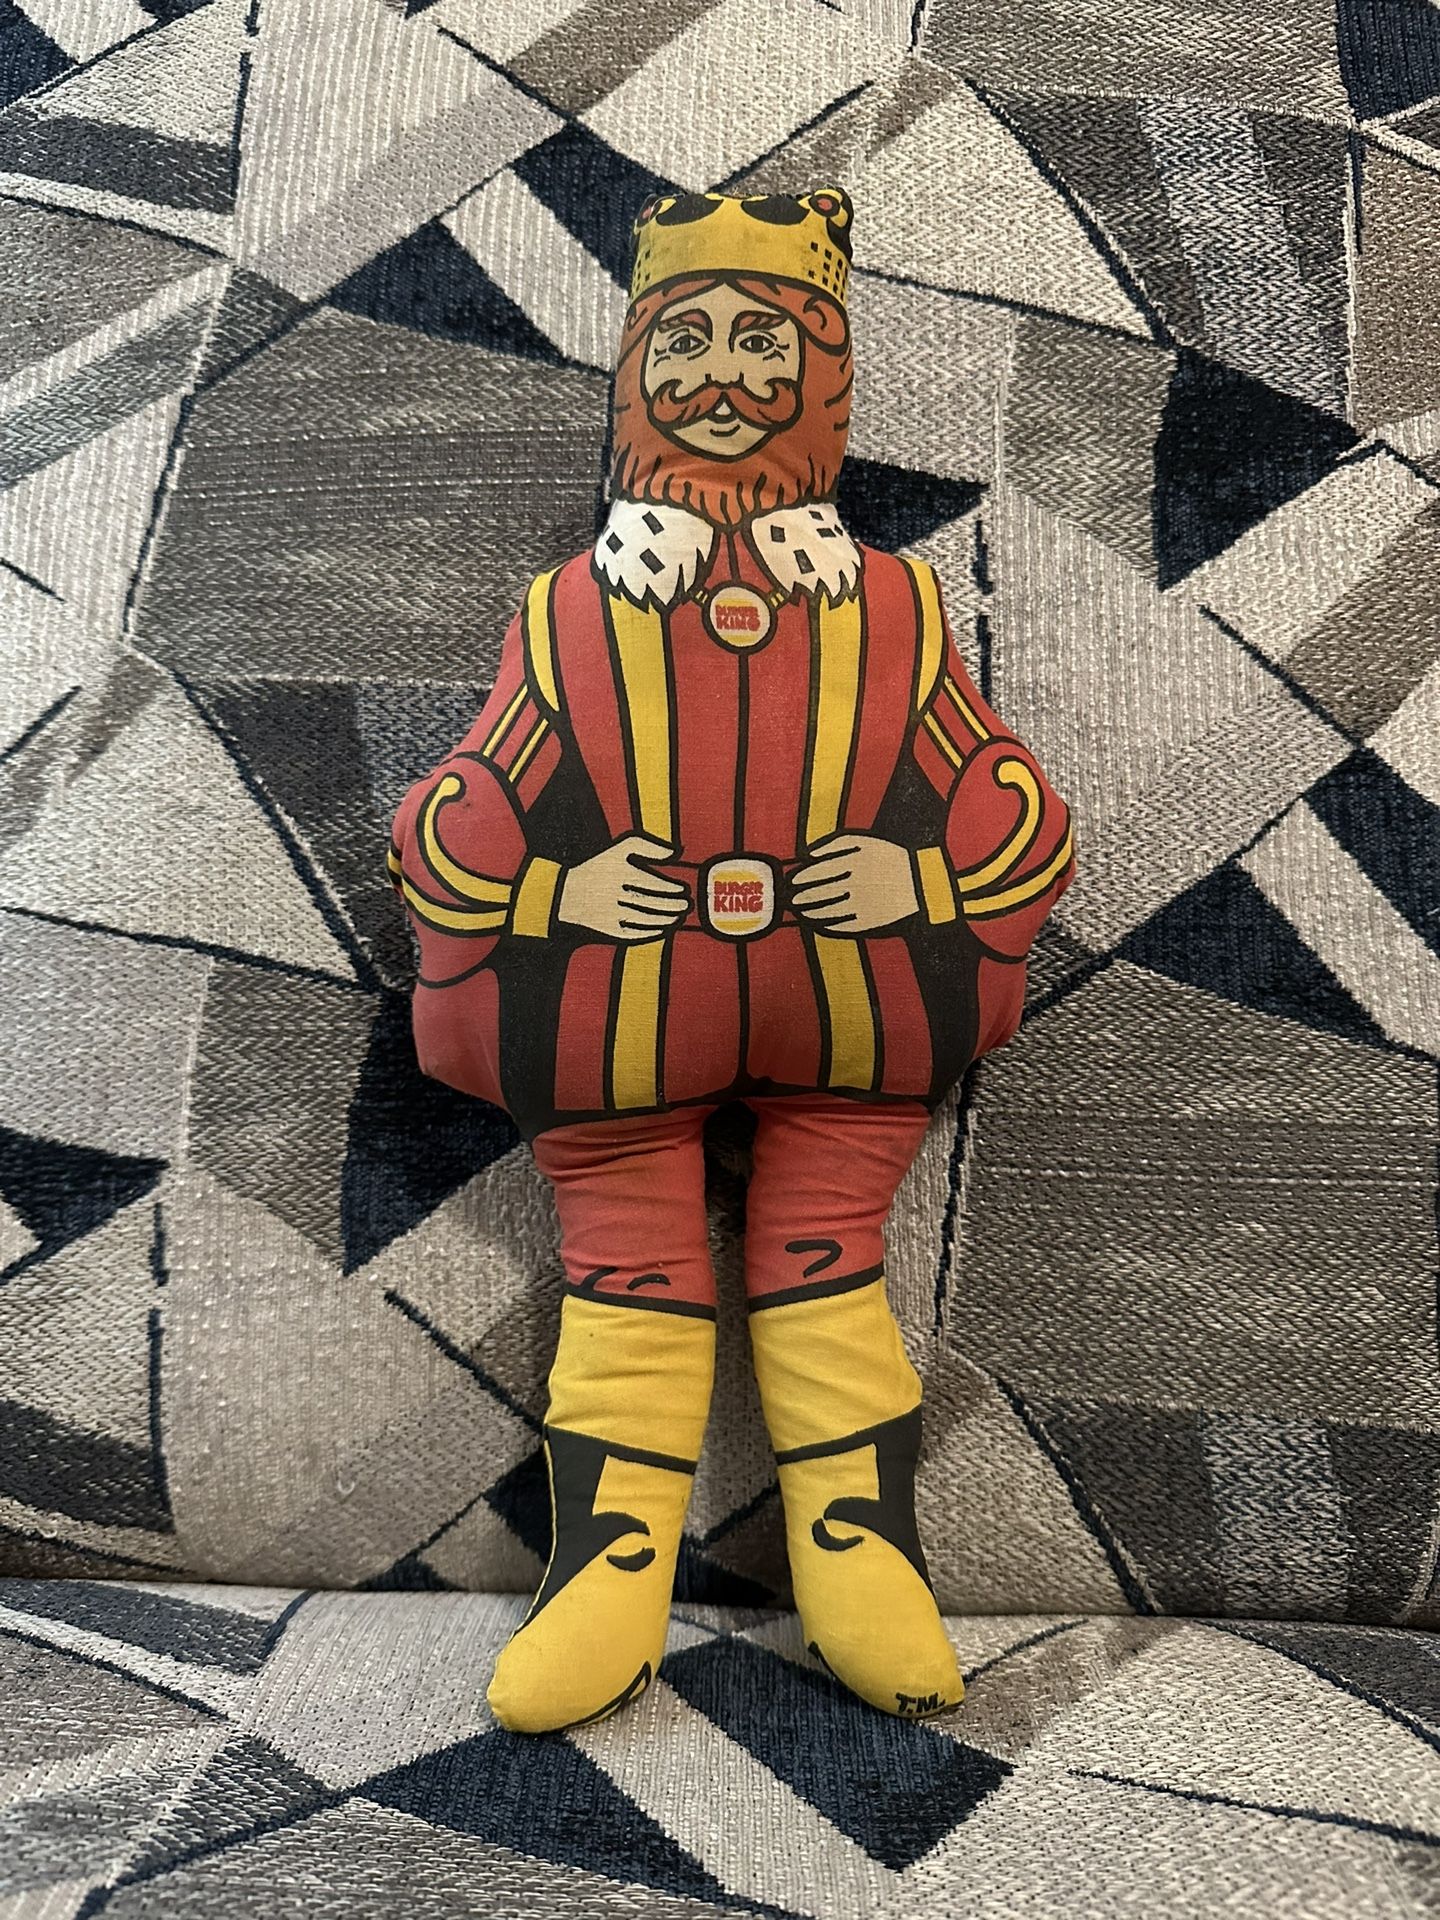 THE BURGER KING, King Plush Doll 13in, Vintage Toy Made by Burger King in 1980s